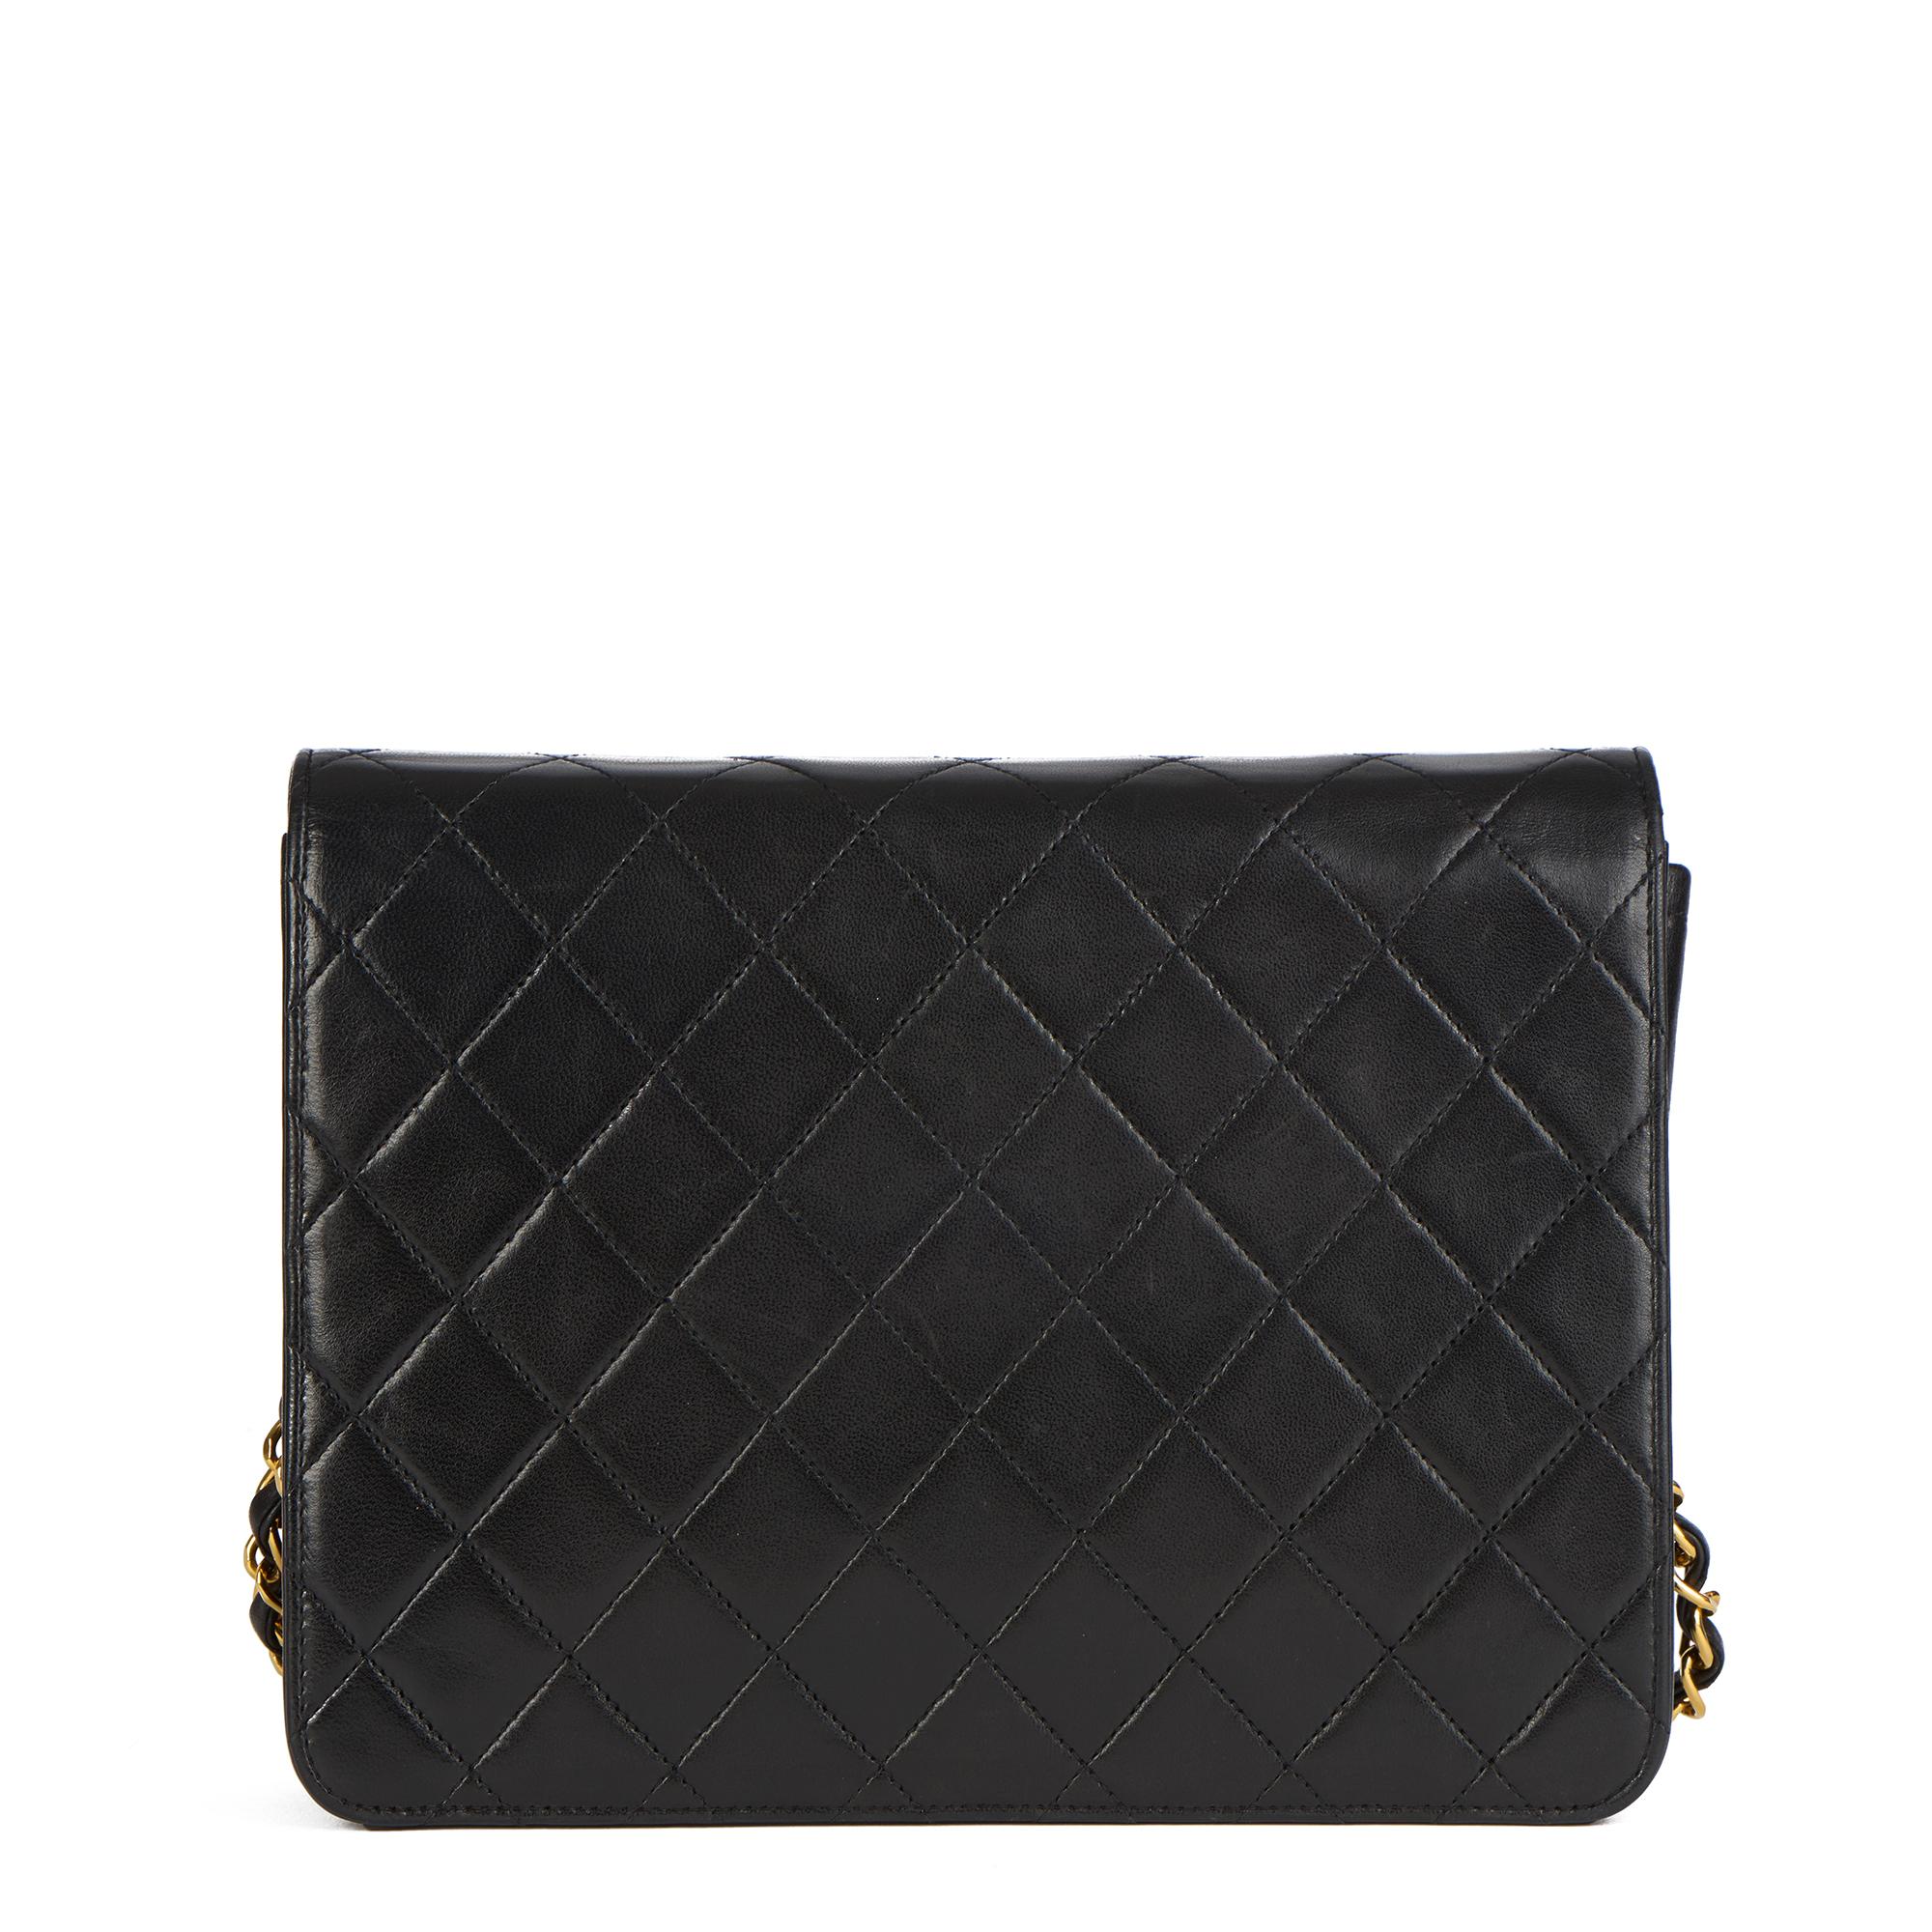 1995 Chanel Black Quilted Lambskin Vintage Small Classic Single Flap Bag 1